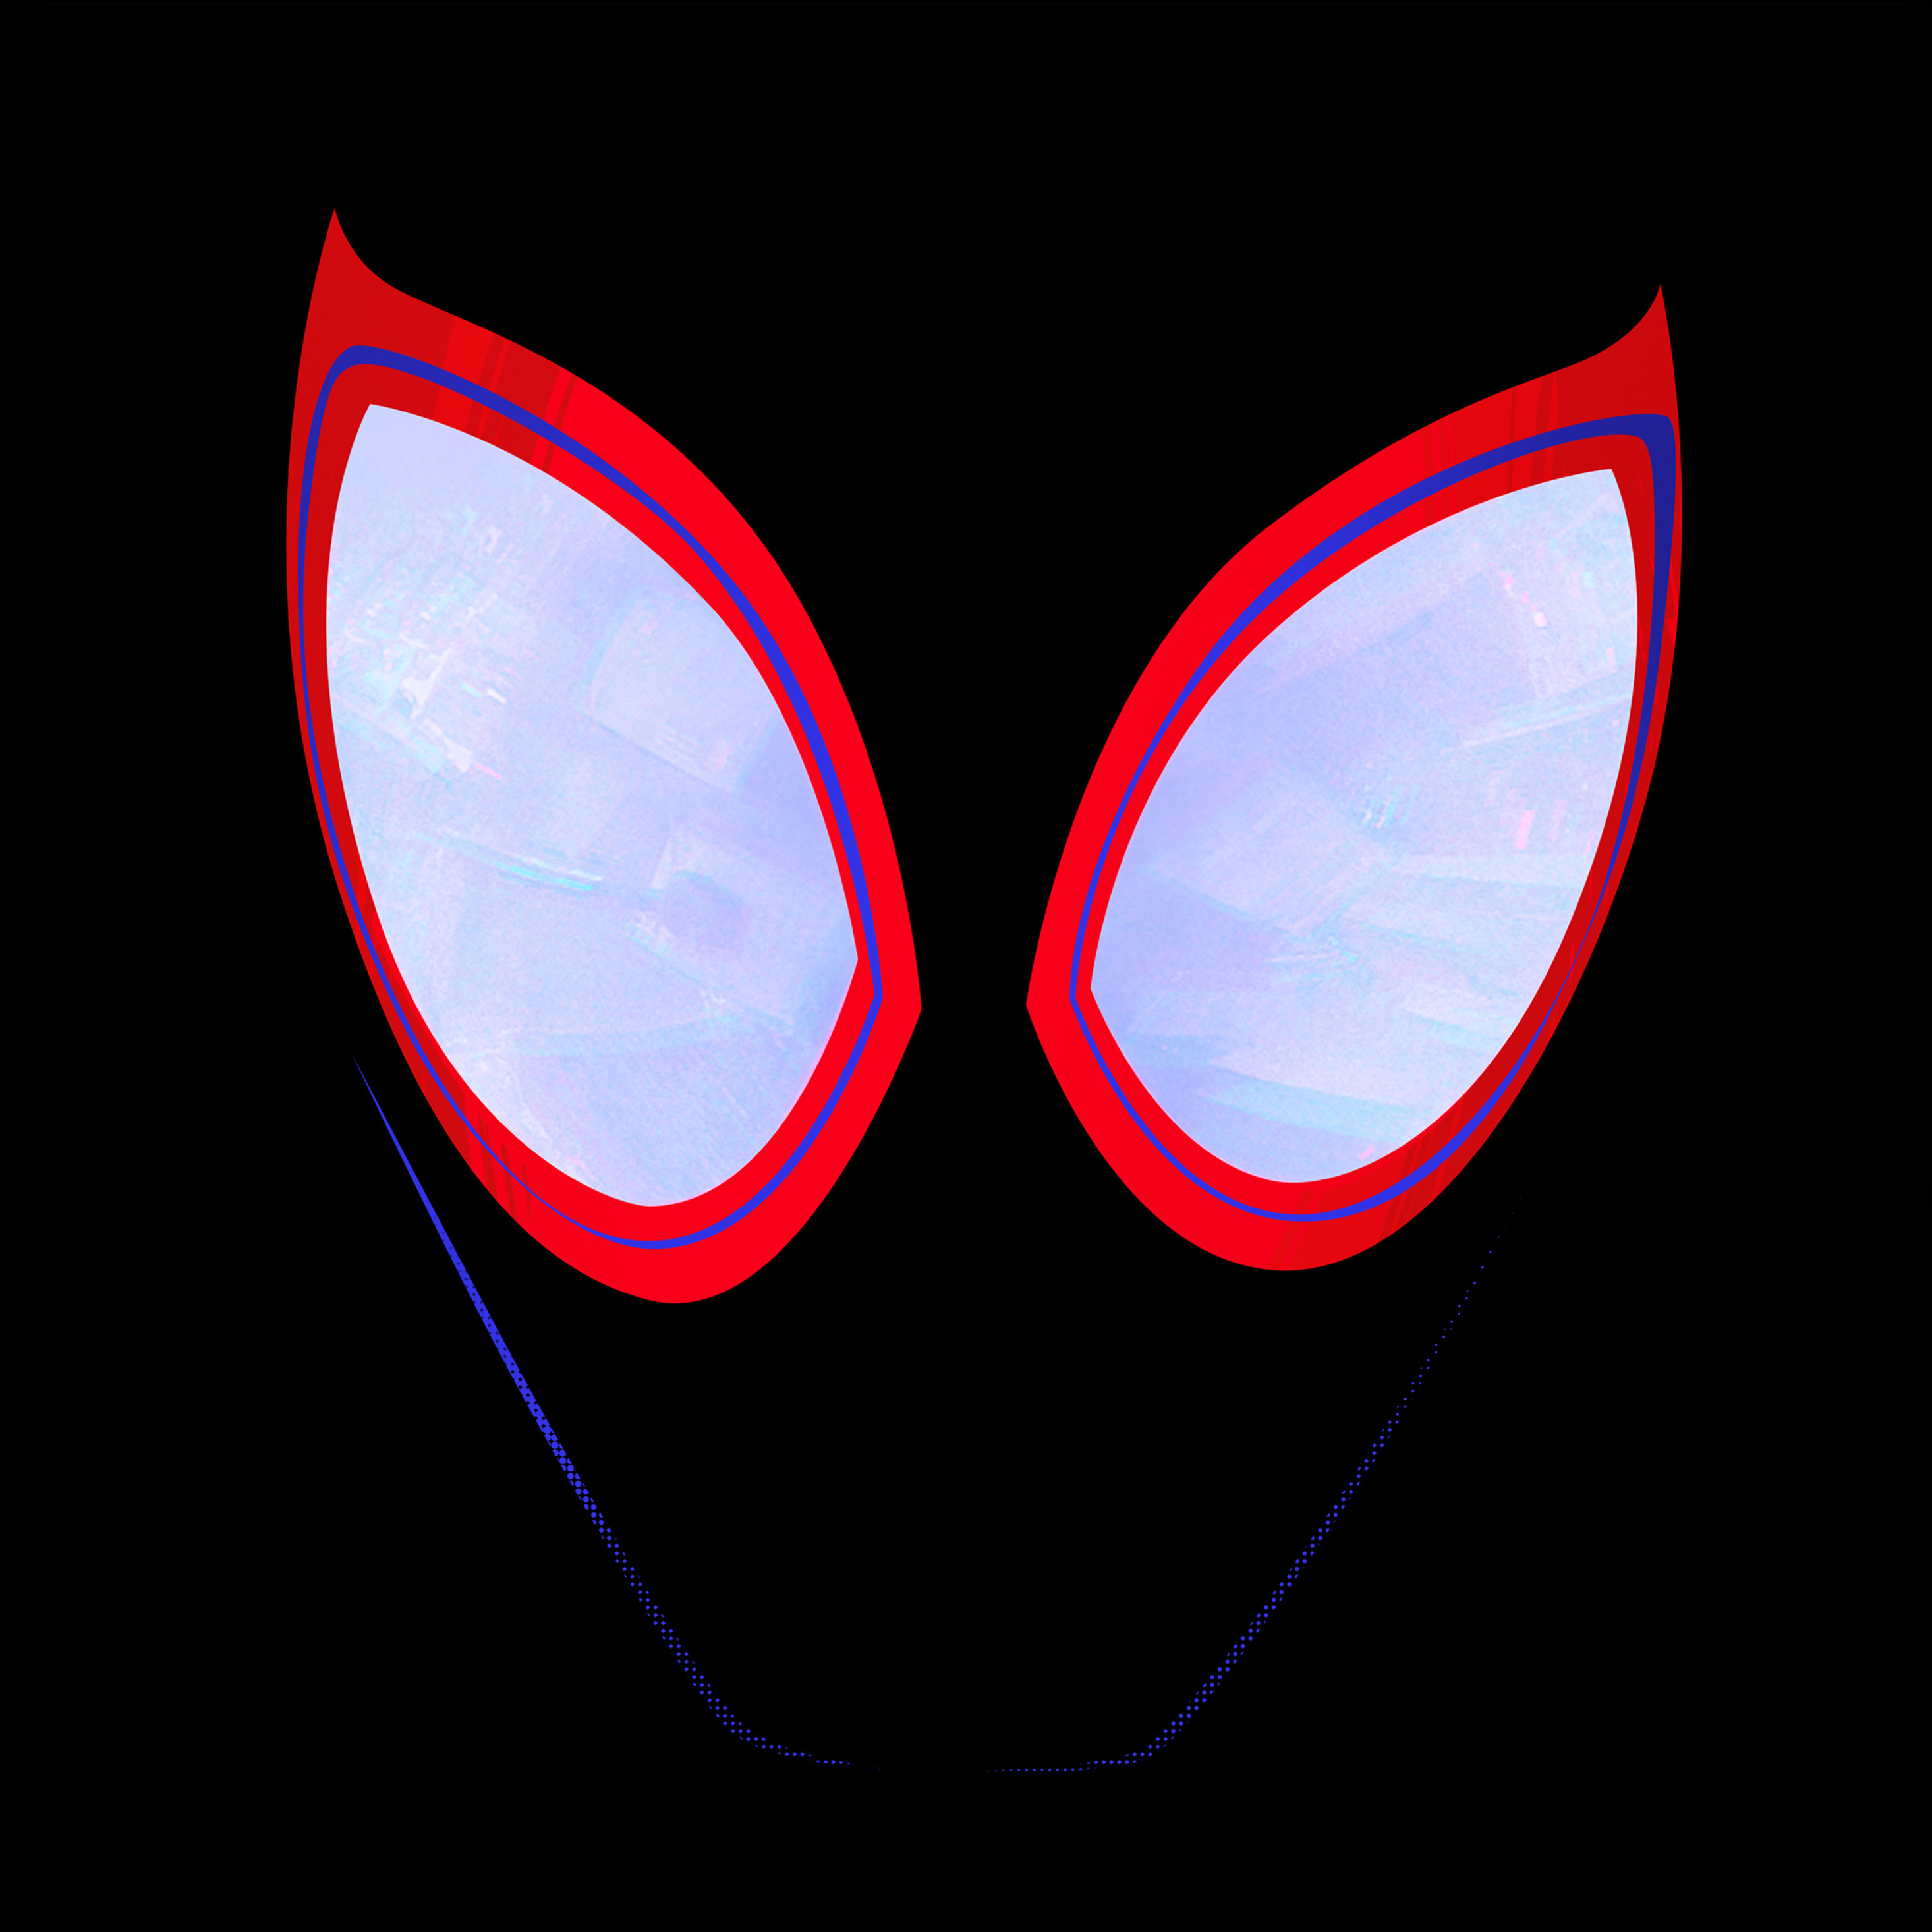 2932x2932 Spiderman Into The Spider Verse 4k 2018 Ipad Pro Retina Display Hd 4k Wallpapers Images Backgrounds Photos And Pictures